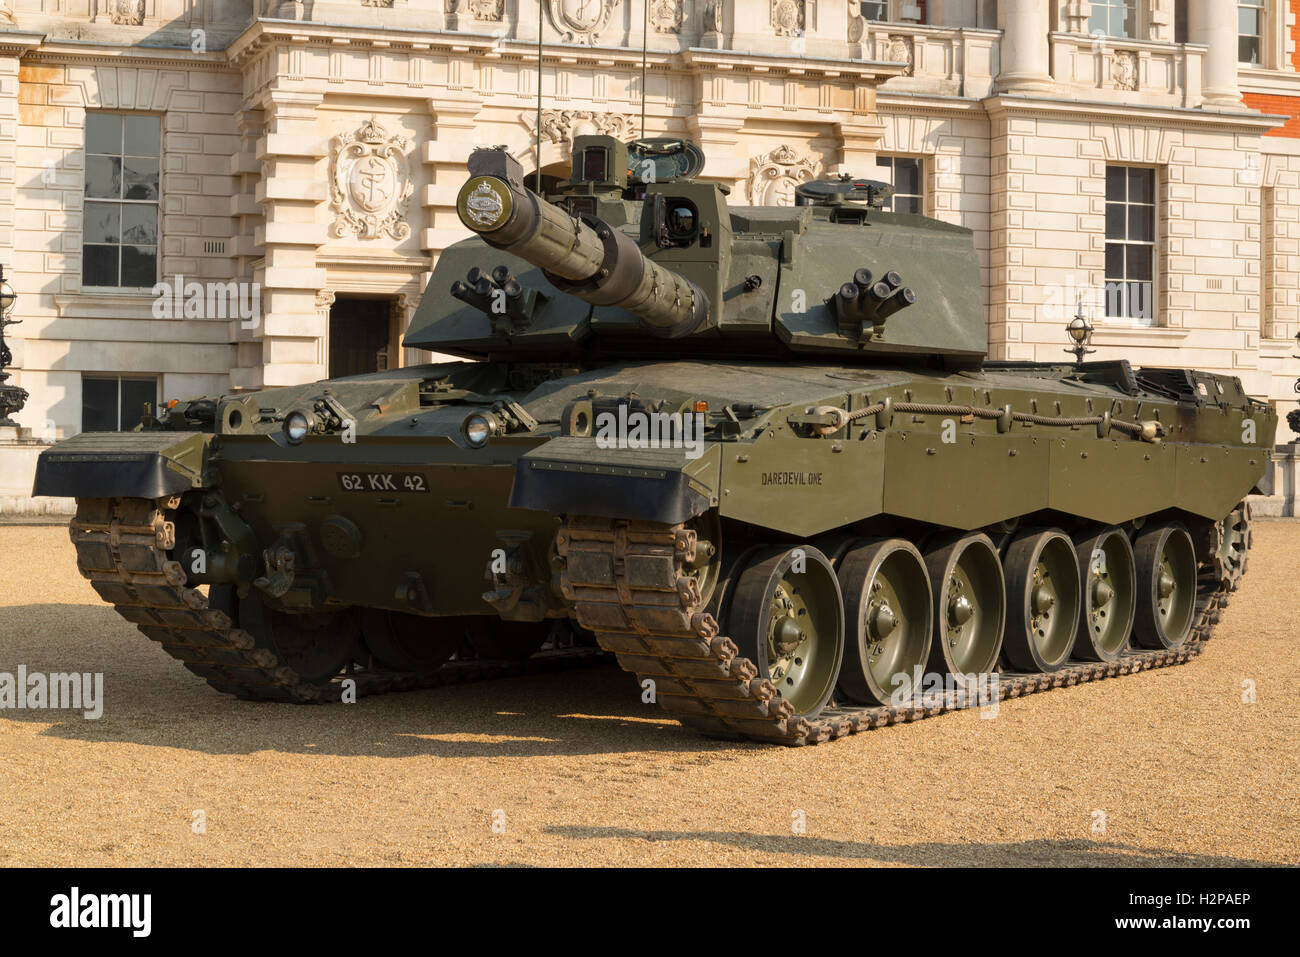 A British Challenger 2 tank in front of the Admiralty Extension, Horse Guards Parade, London, on Thursday, 15 September 2016. Stock Photo